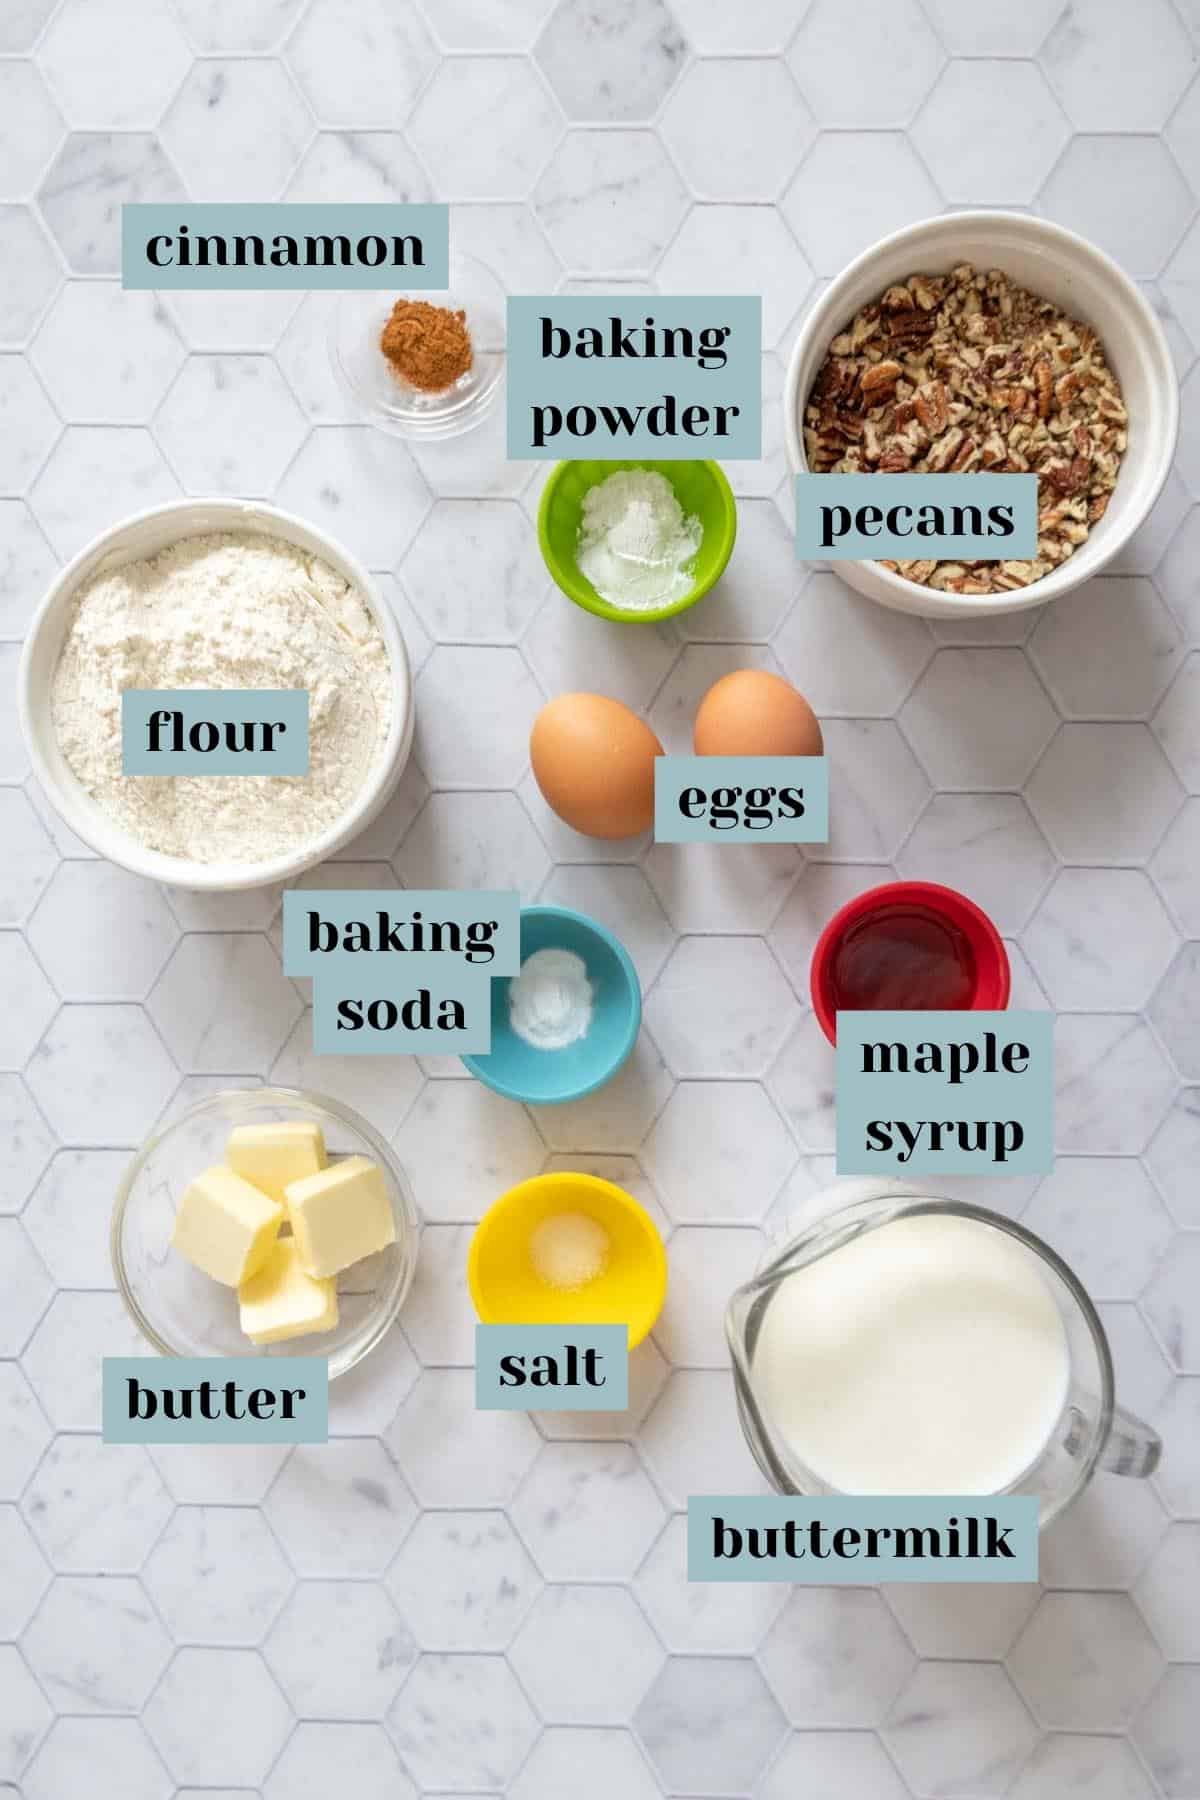 Ingredients for pecan pancakes on a tile surface with labels.